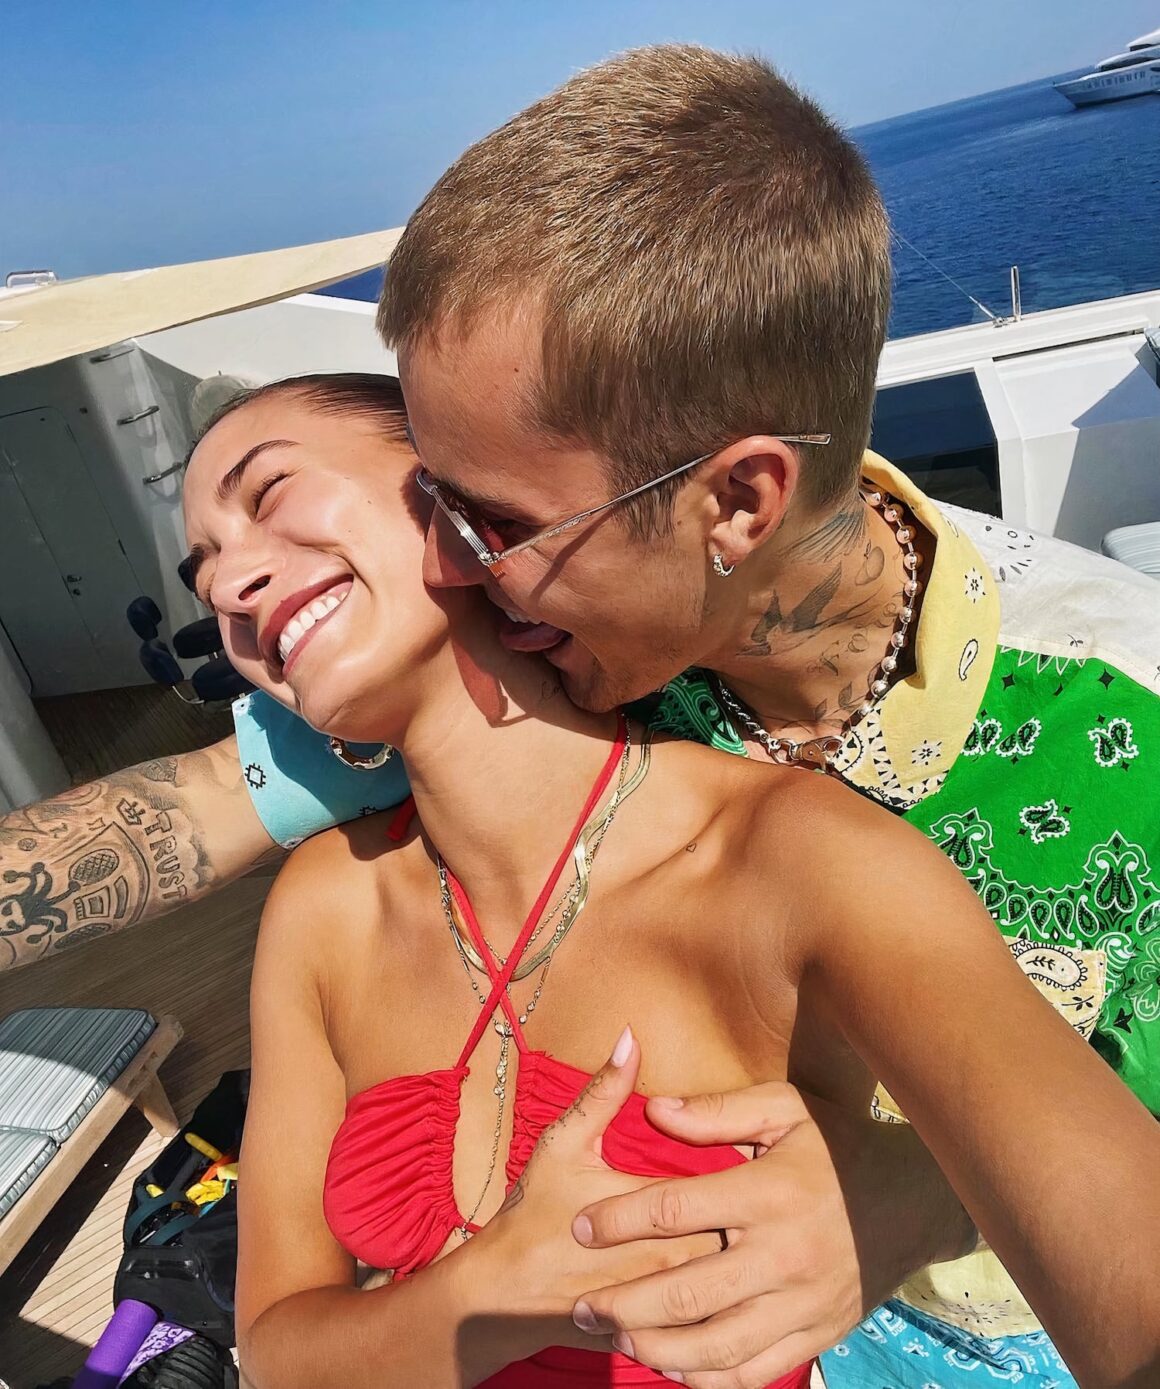 Justin Bieber's Wife Hailey Baldwin Reacts To Rumors Her Marriage Is Falling Apart